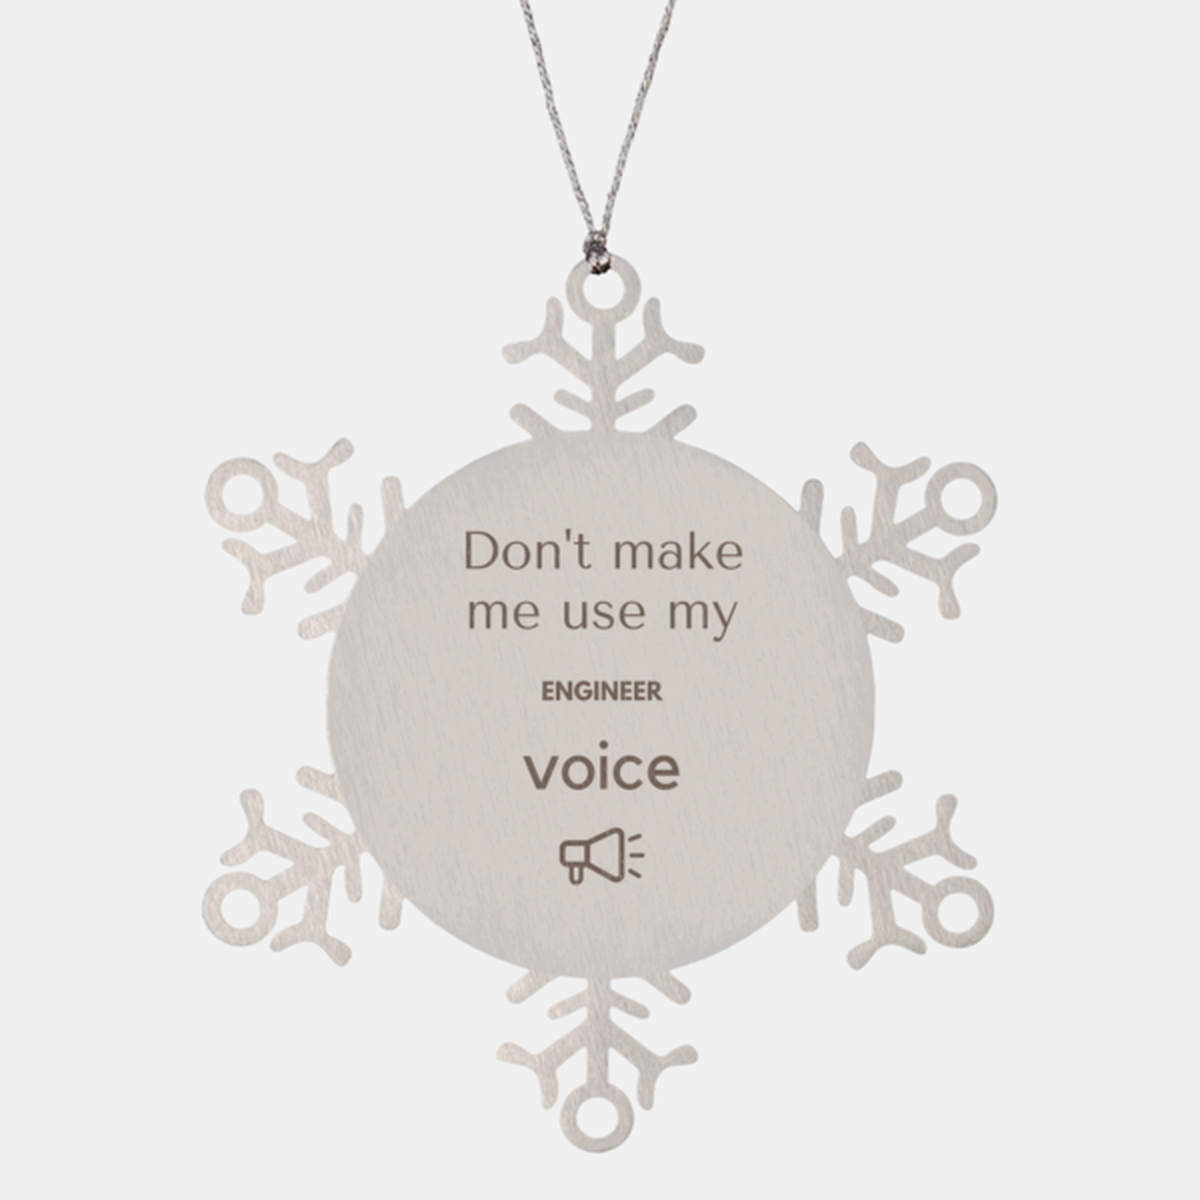 Don't make me use my Engineer voice, Sarcasm Engineer Ornament Gifts, Christmas Engineer Snowflake Ornament Unique Gifts For Engineer Coworkers, Men, Women, Colleague, Friends